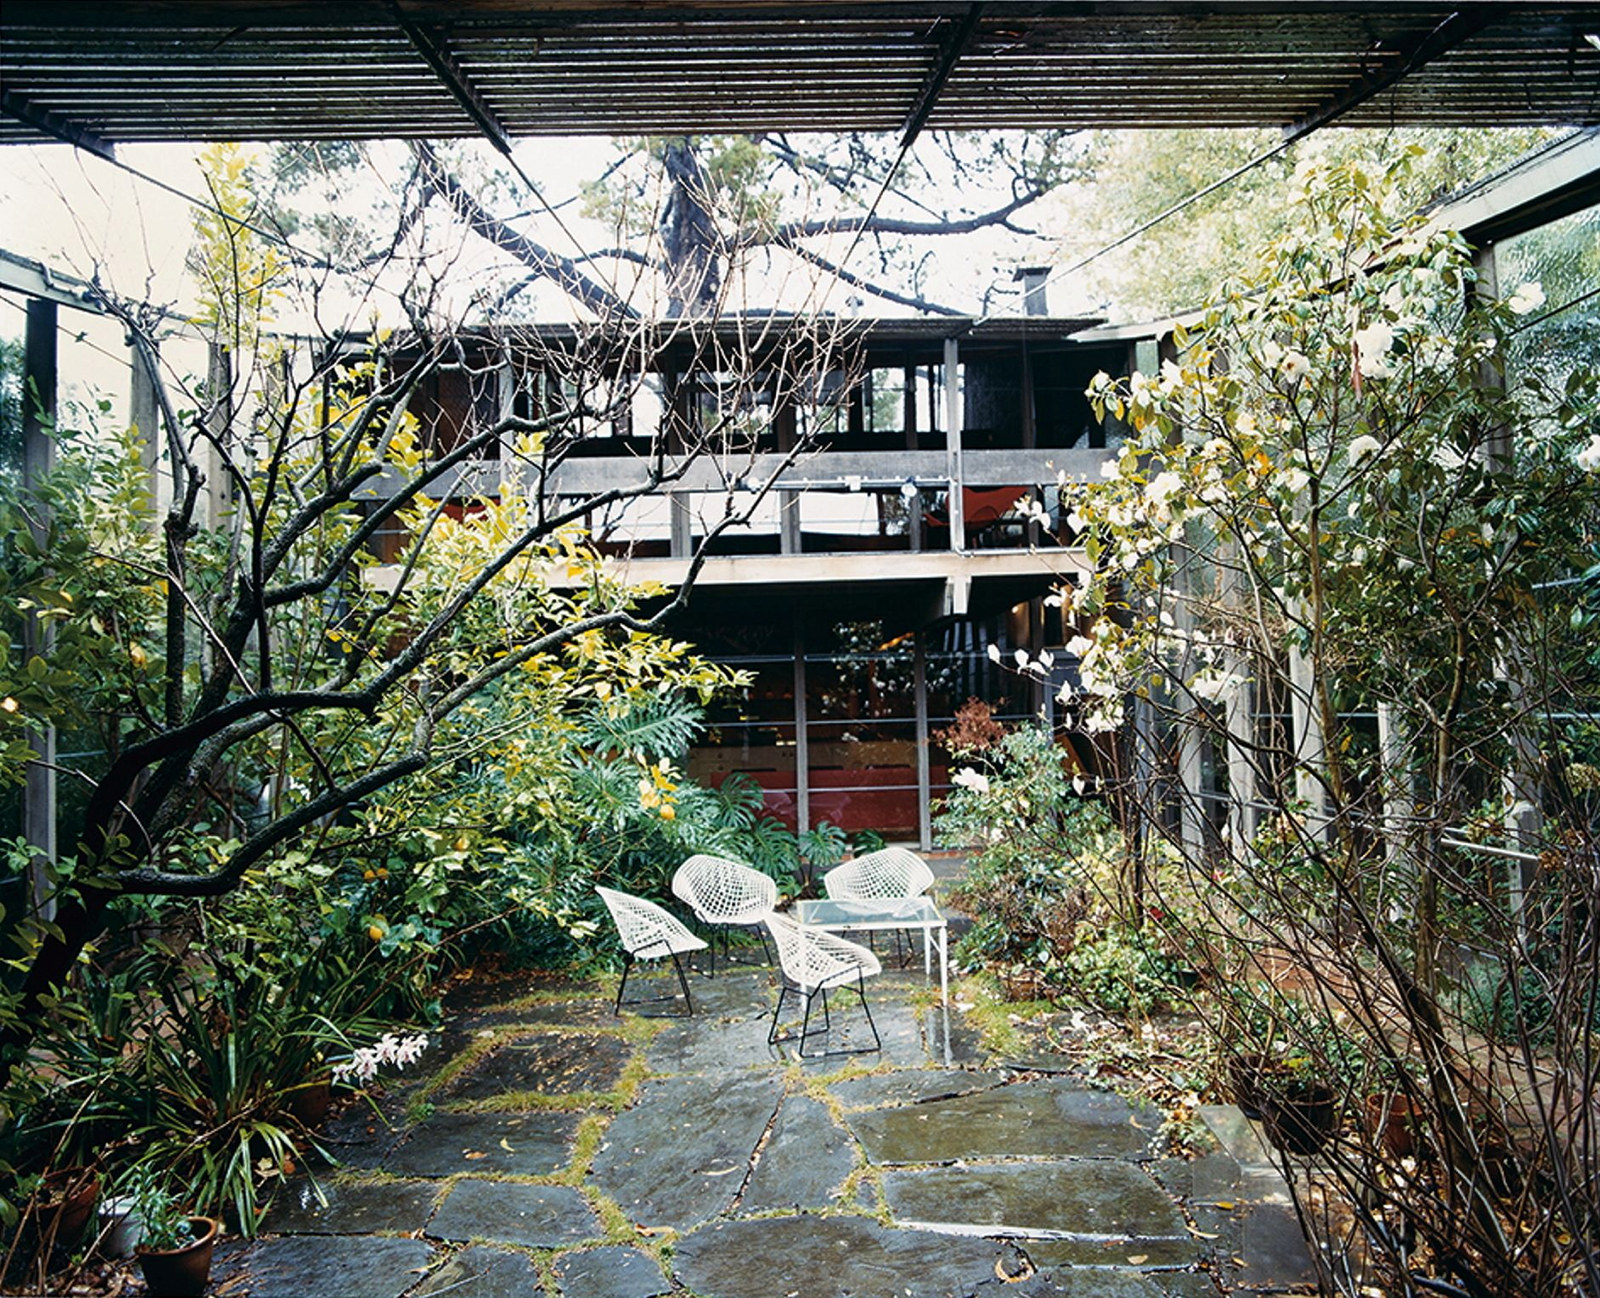 This is a colour photograph of a courtyard with large stone paving, a white metal table and chair setting, and surrounded by flowering shrubs and trees